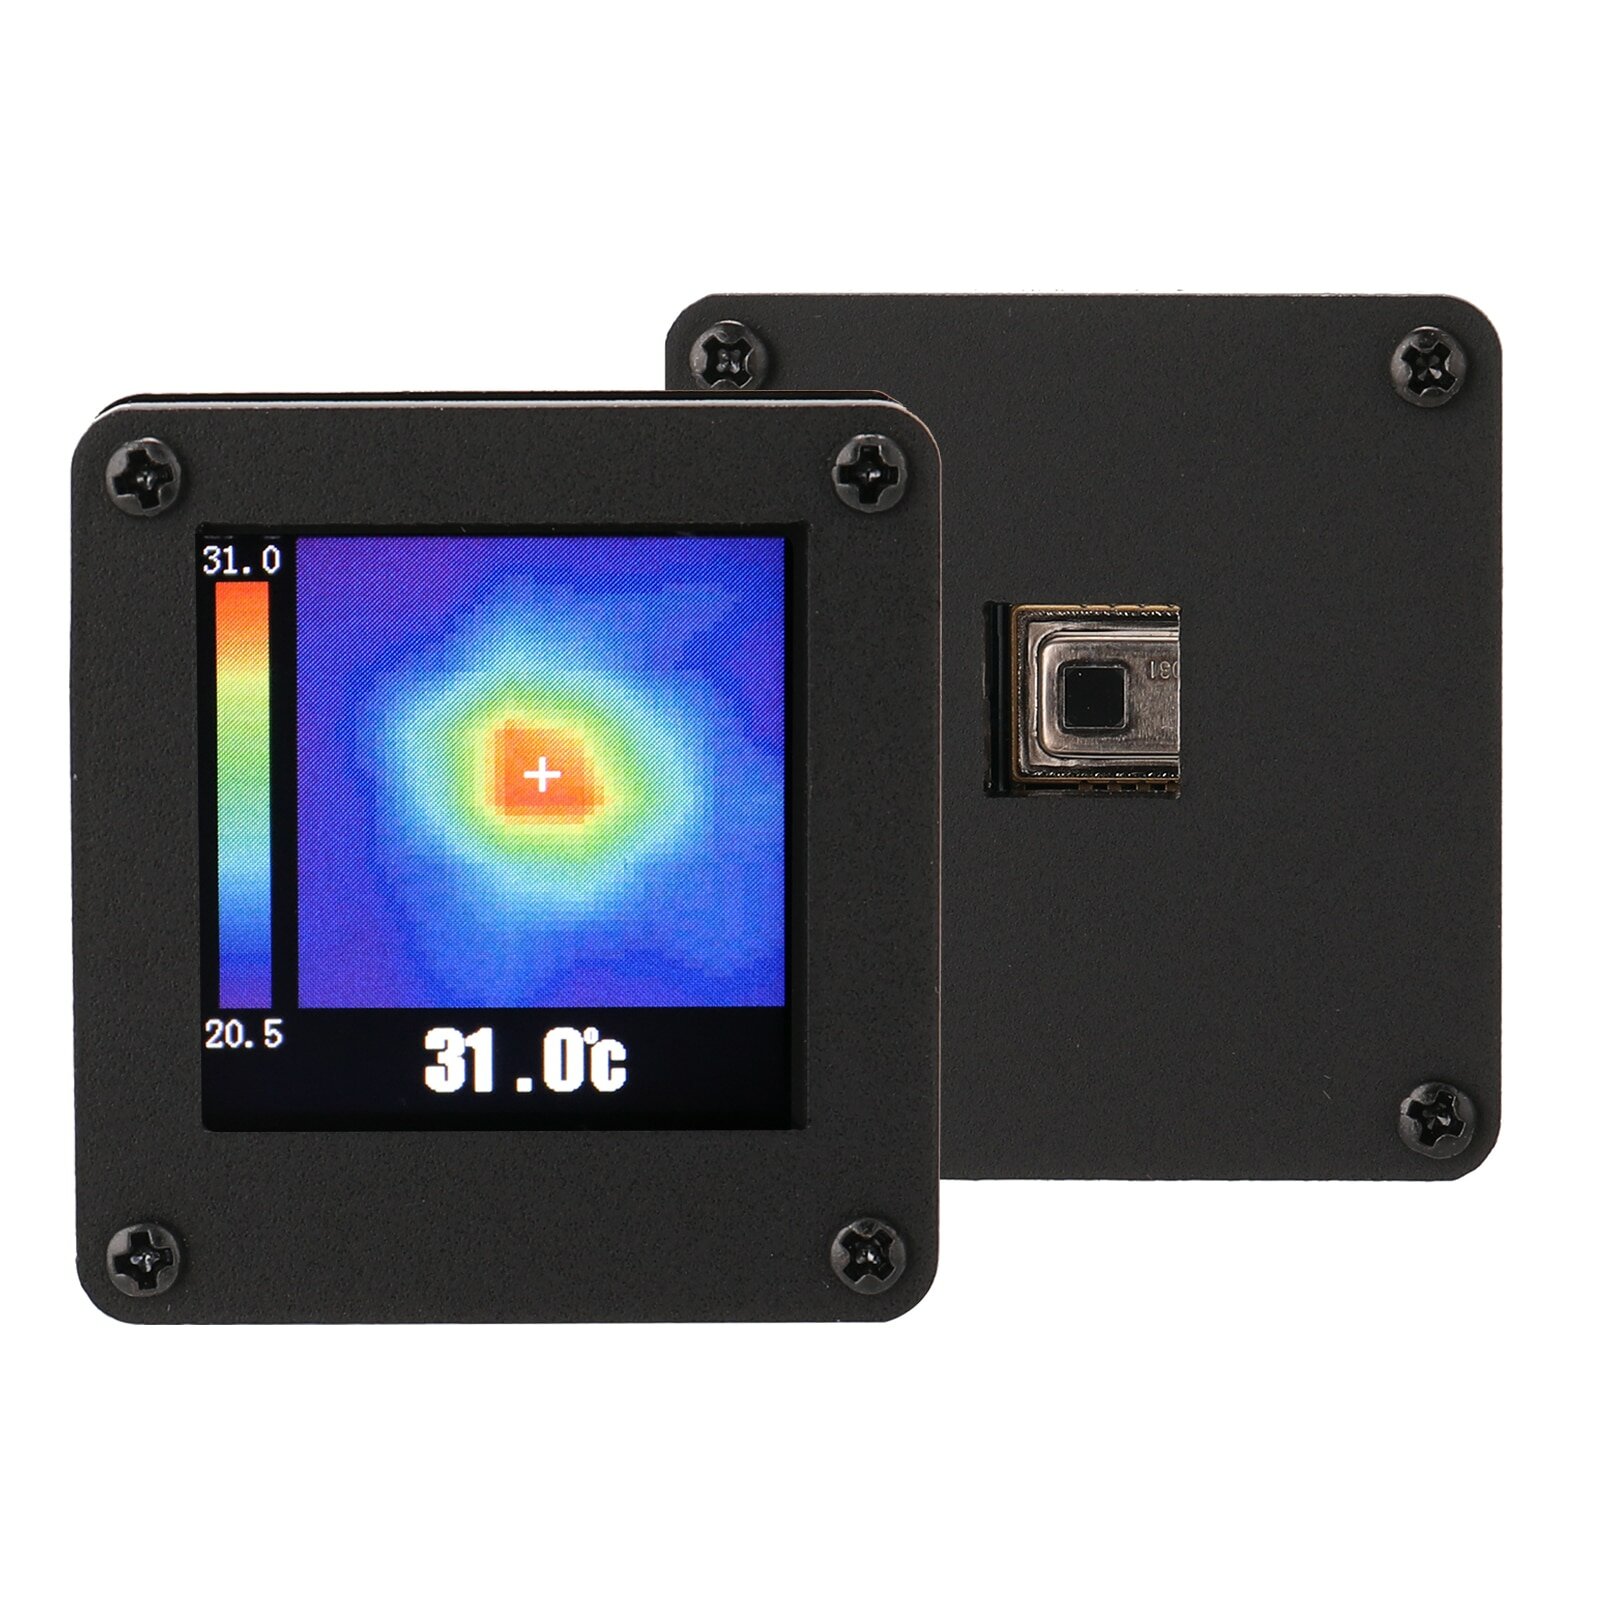 AMG8833 IR 8*8 Infrared Thermal Imager Thermograph Camera Array Temperature Sensor 7M Farthest Detection Distance with Housing